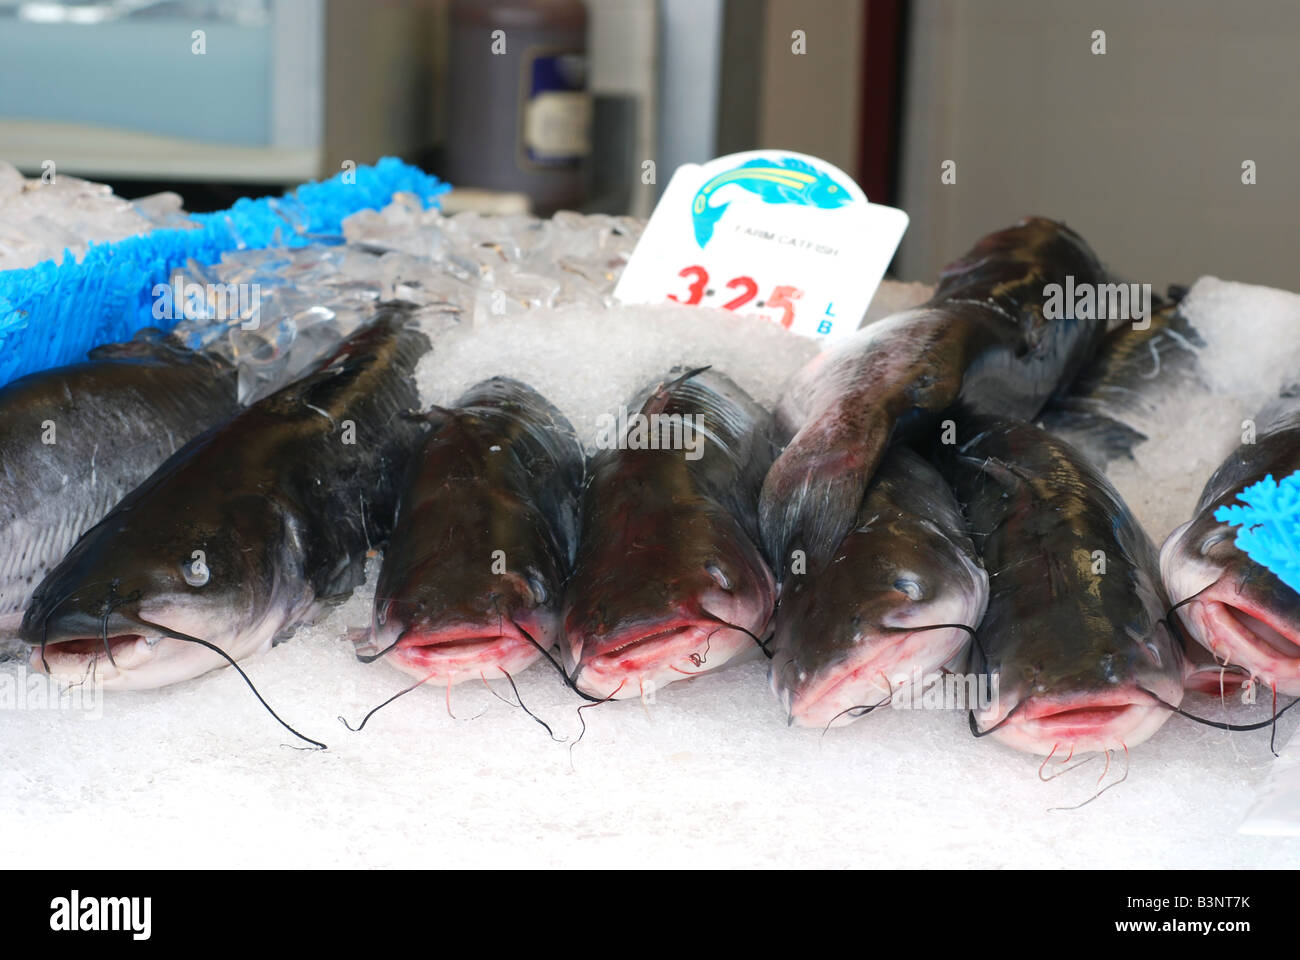 Fresh catfish on ice for sale at a fish market Stock Photo